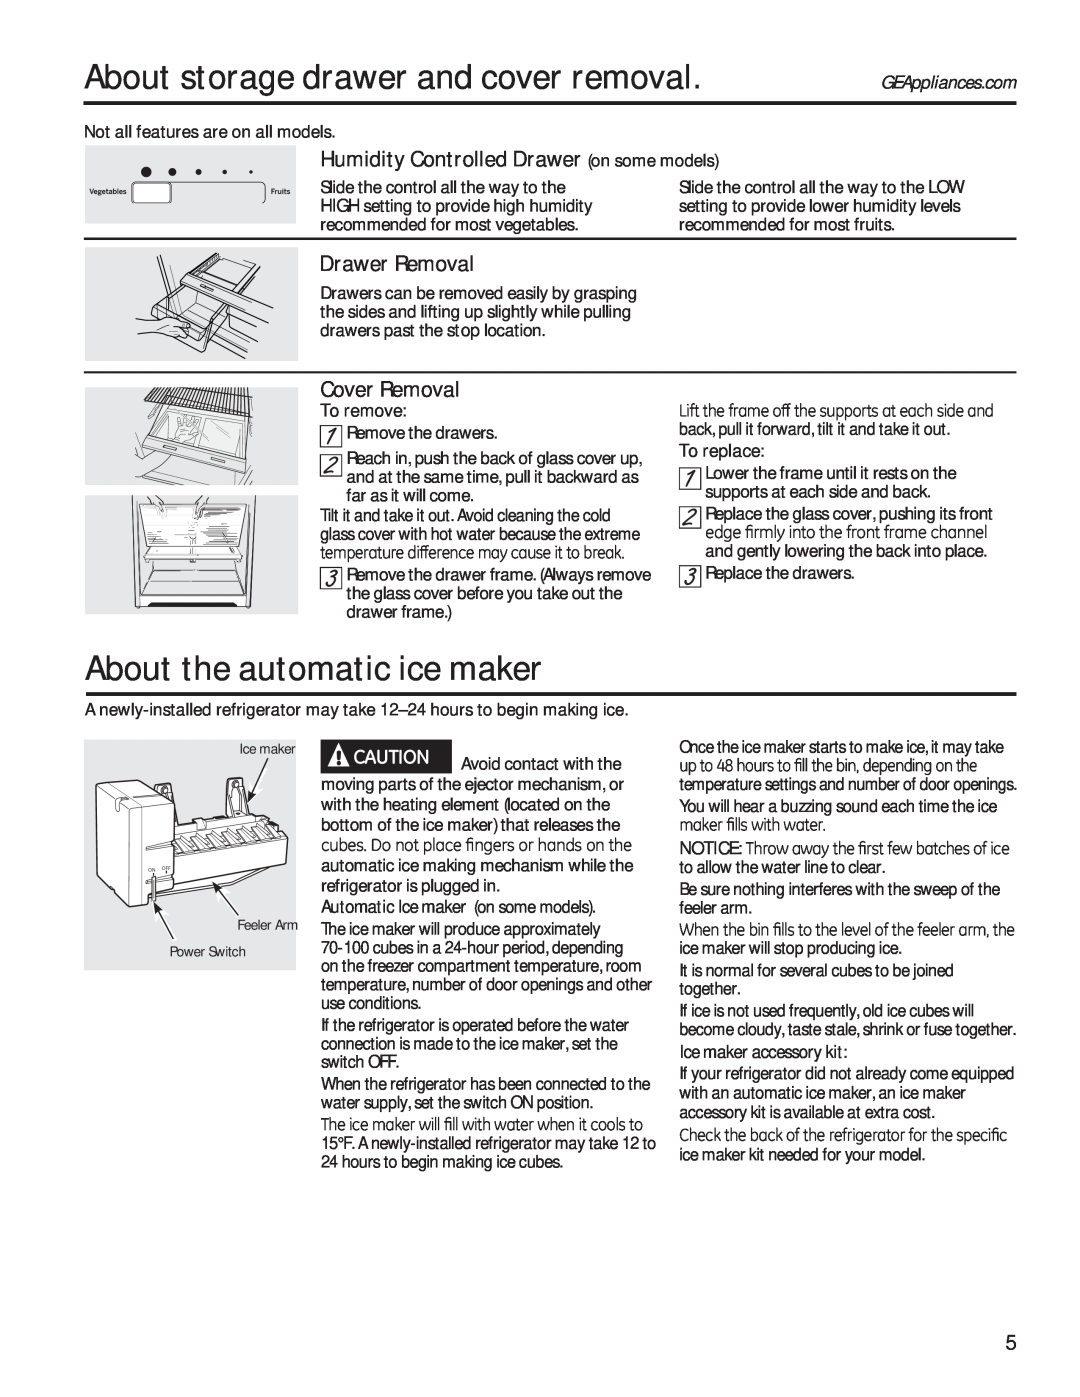 GE GTE18GTHWW About storage drawer and cover removal, About the automatic ice maker, Drawer Removal, Cover Removal 